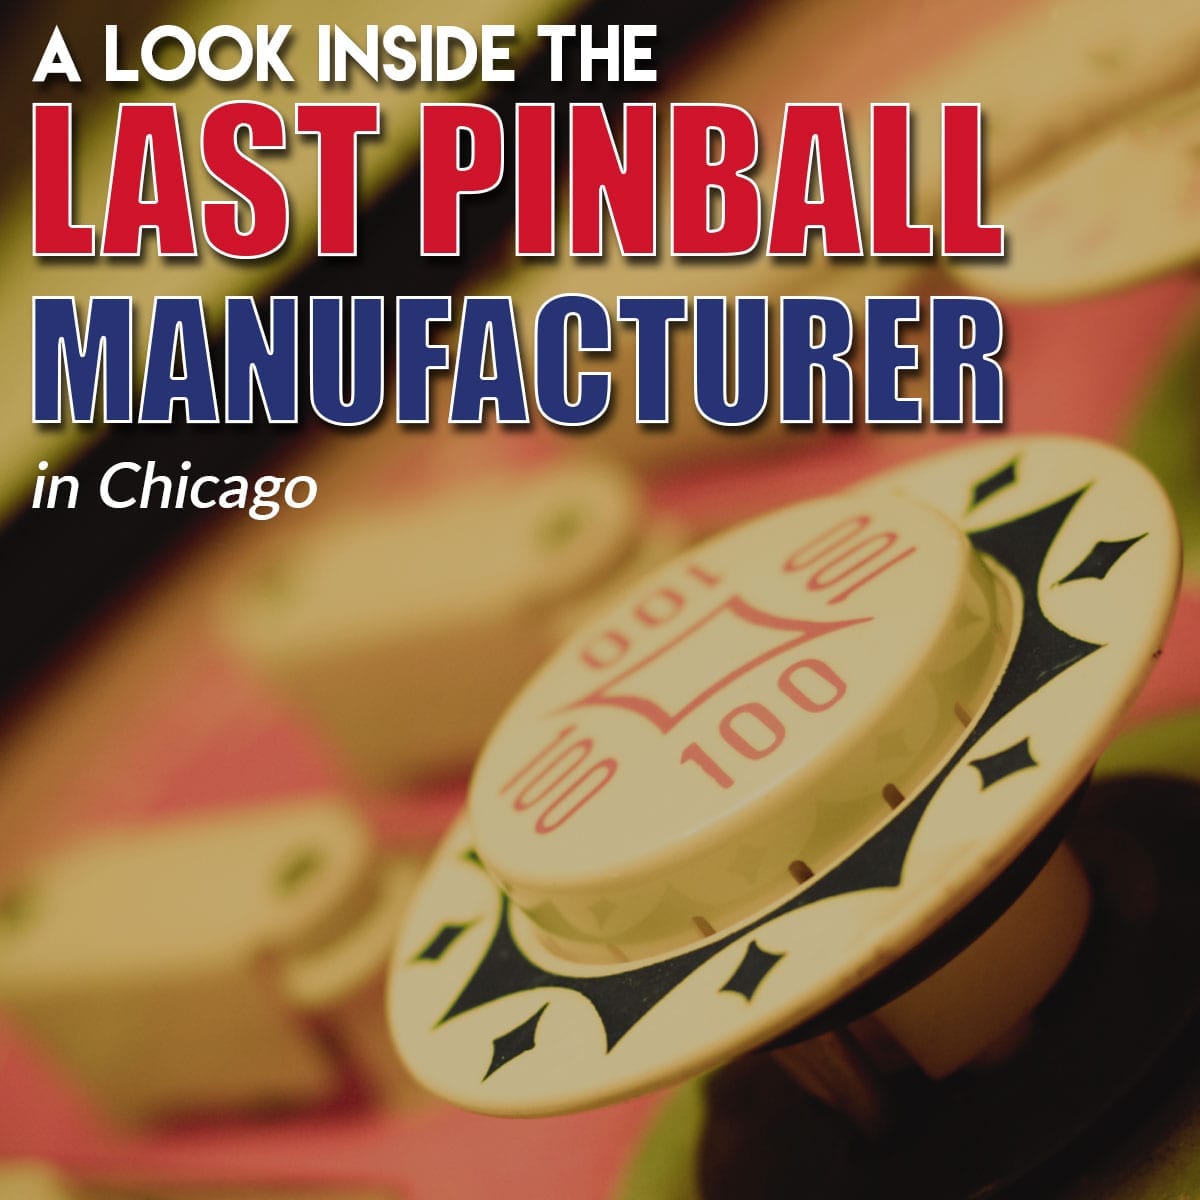 A Look Inside the Last Pinball Manufacturer in Chicago